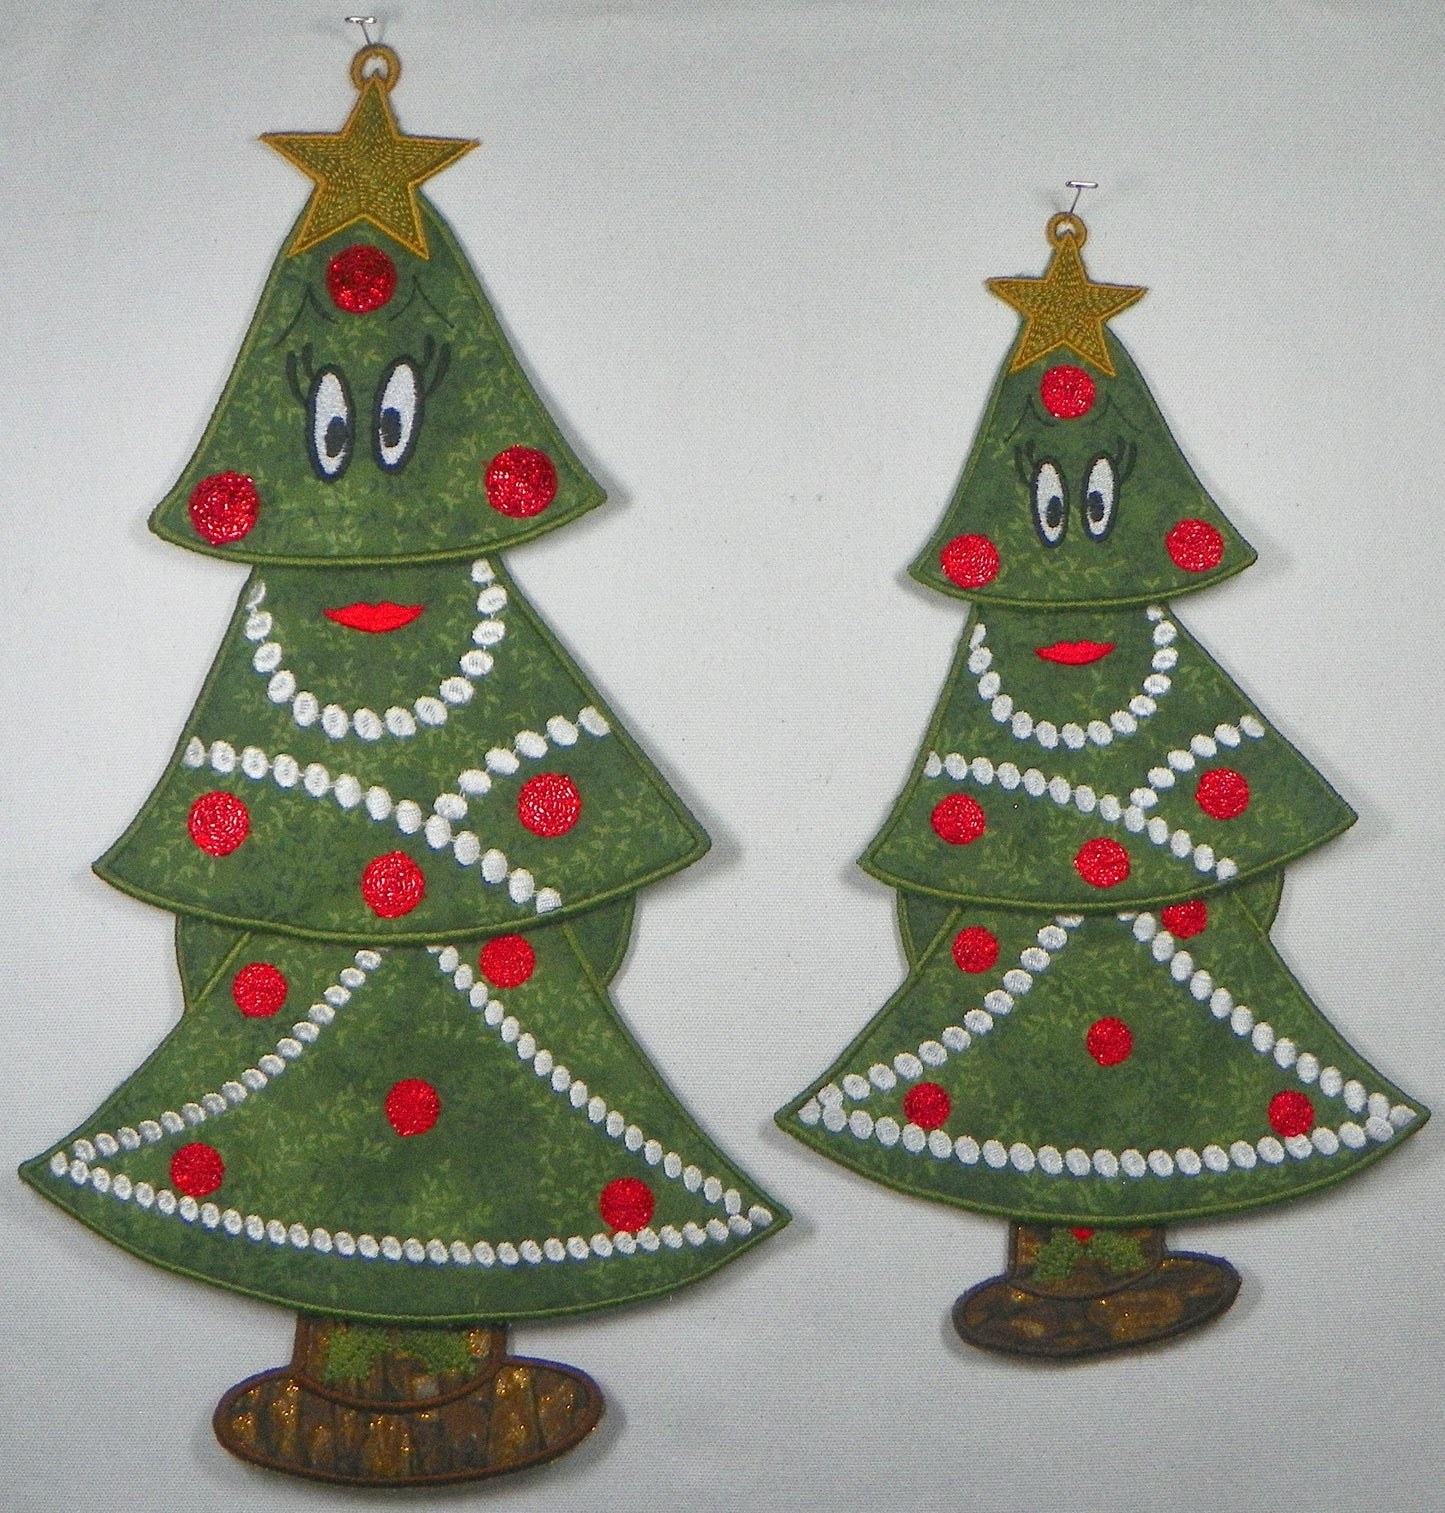 Freestanding Applique Christmas Tree Projects for  [5x7] or  [6x10] # 10418